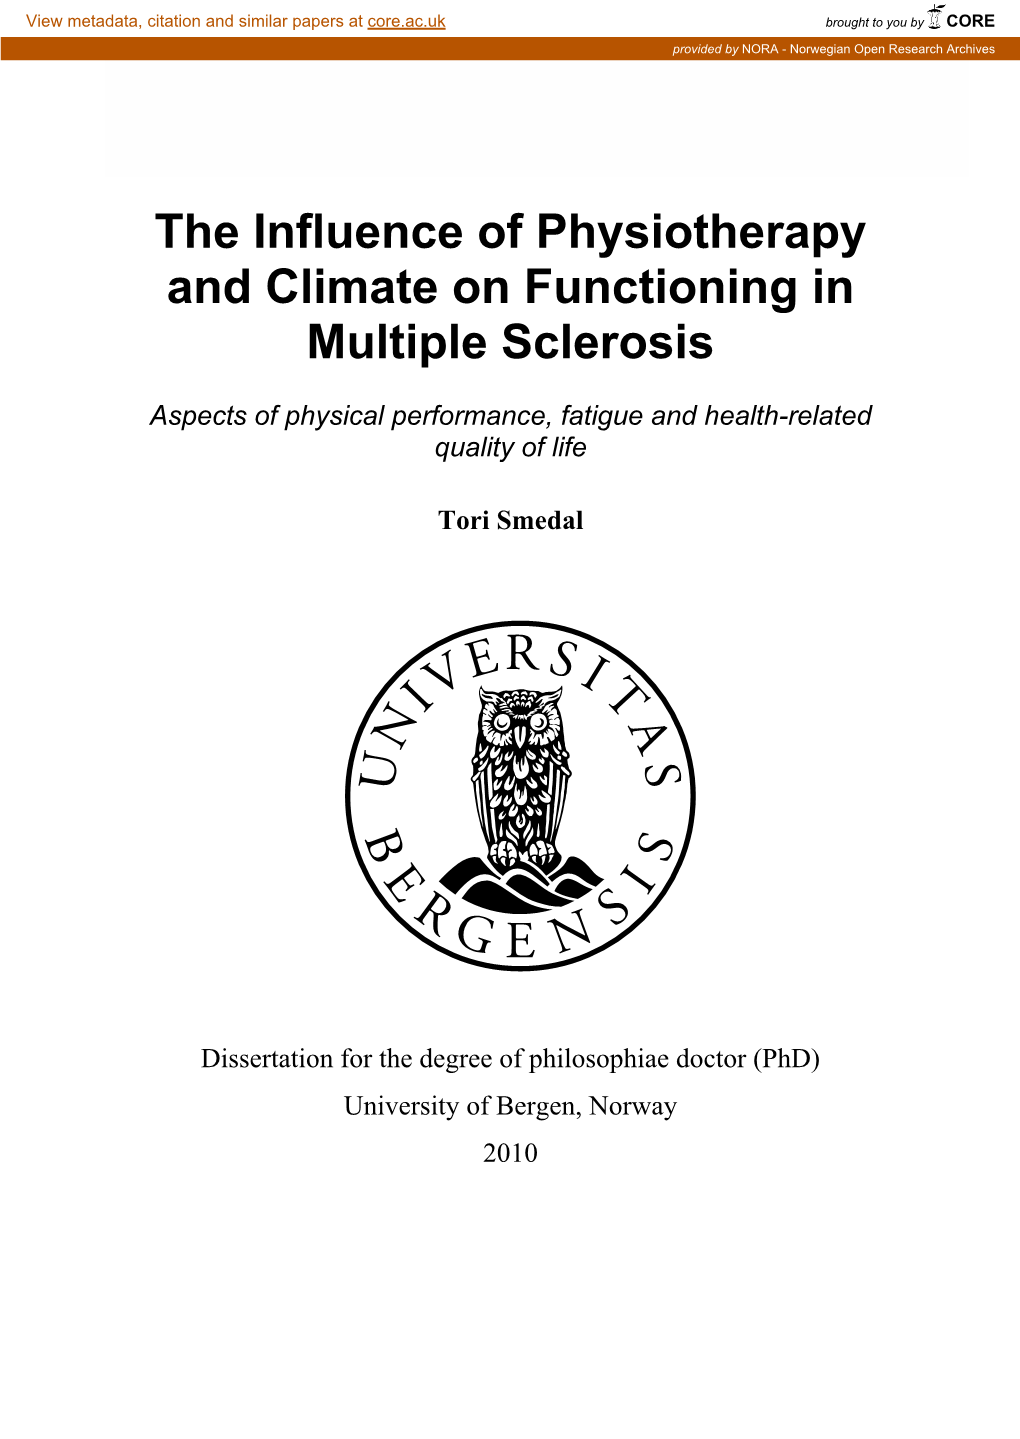 The Influence of Physiotherapy and Climate on Functioning in Multiple Sclerosis